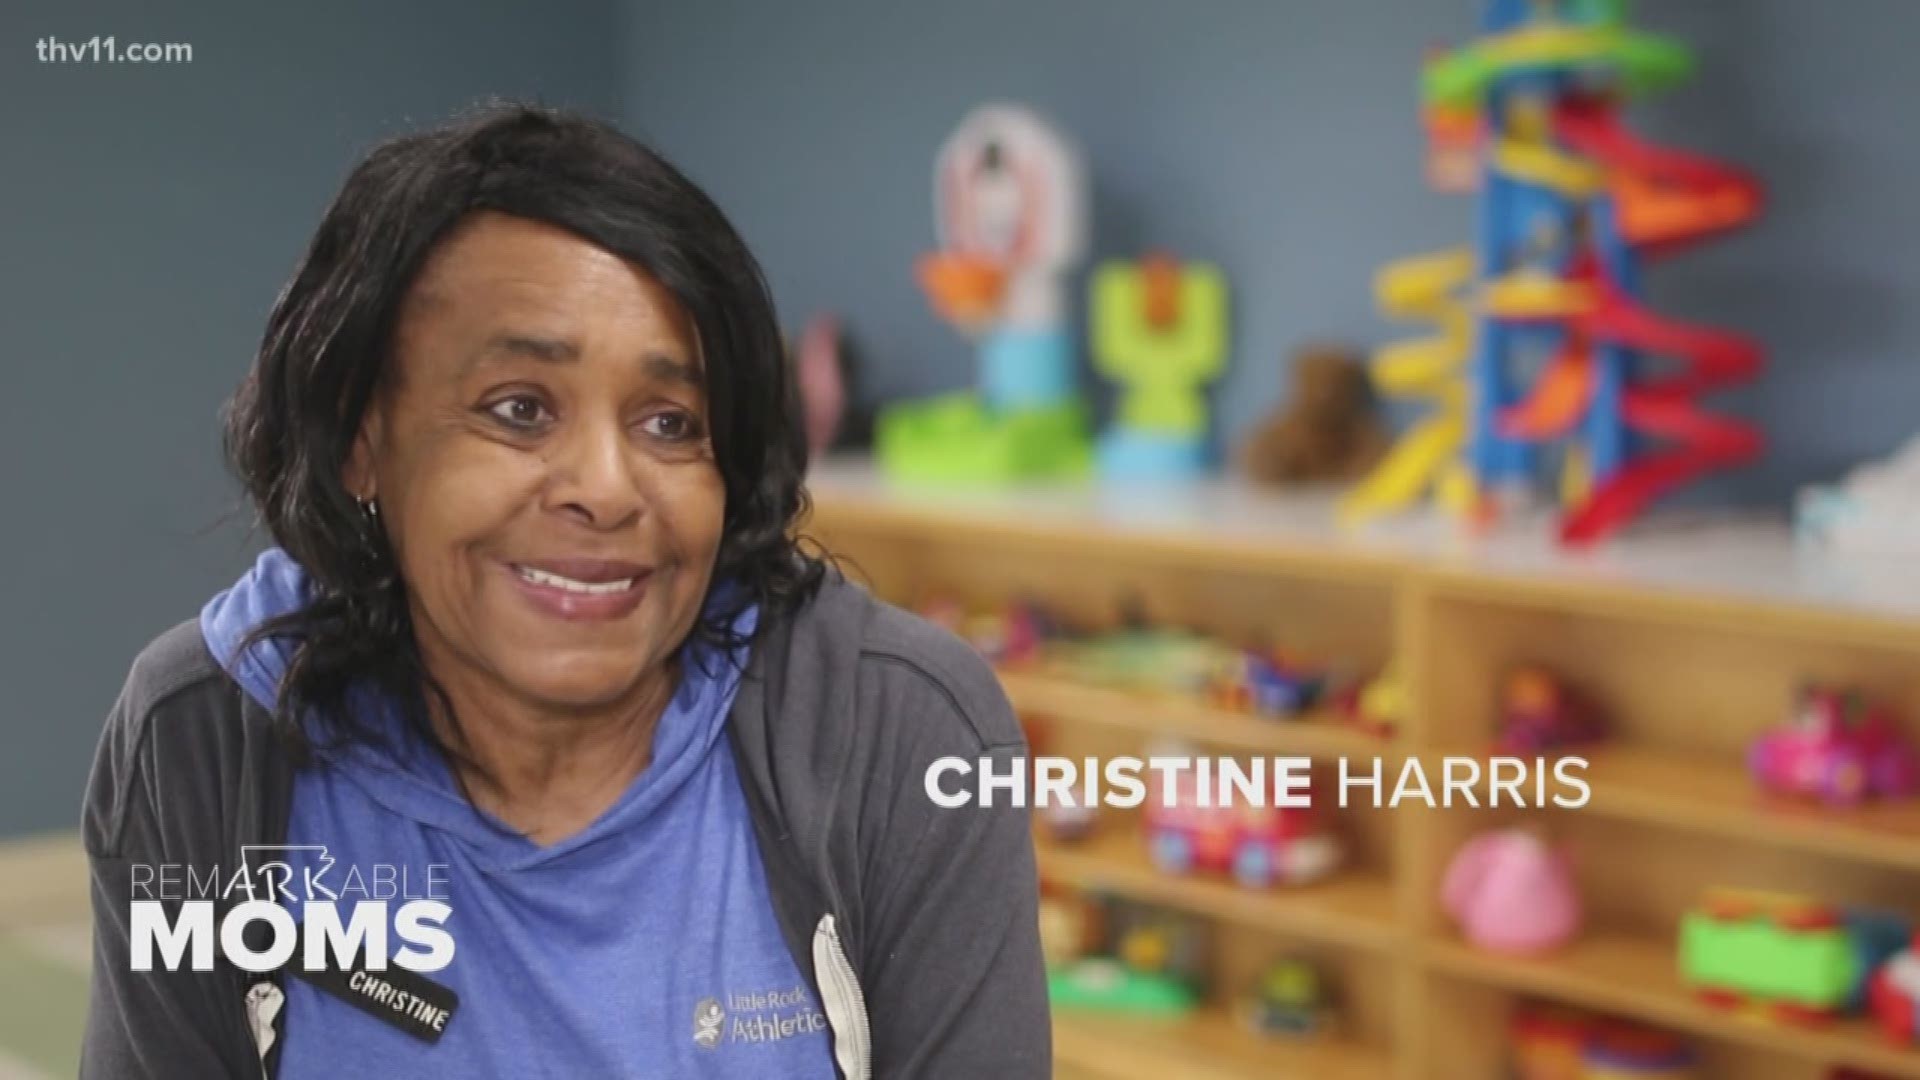 Christine has been caring for kids at the Little Rock Athletic Club for nearly four decades.